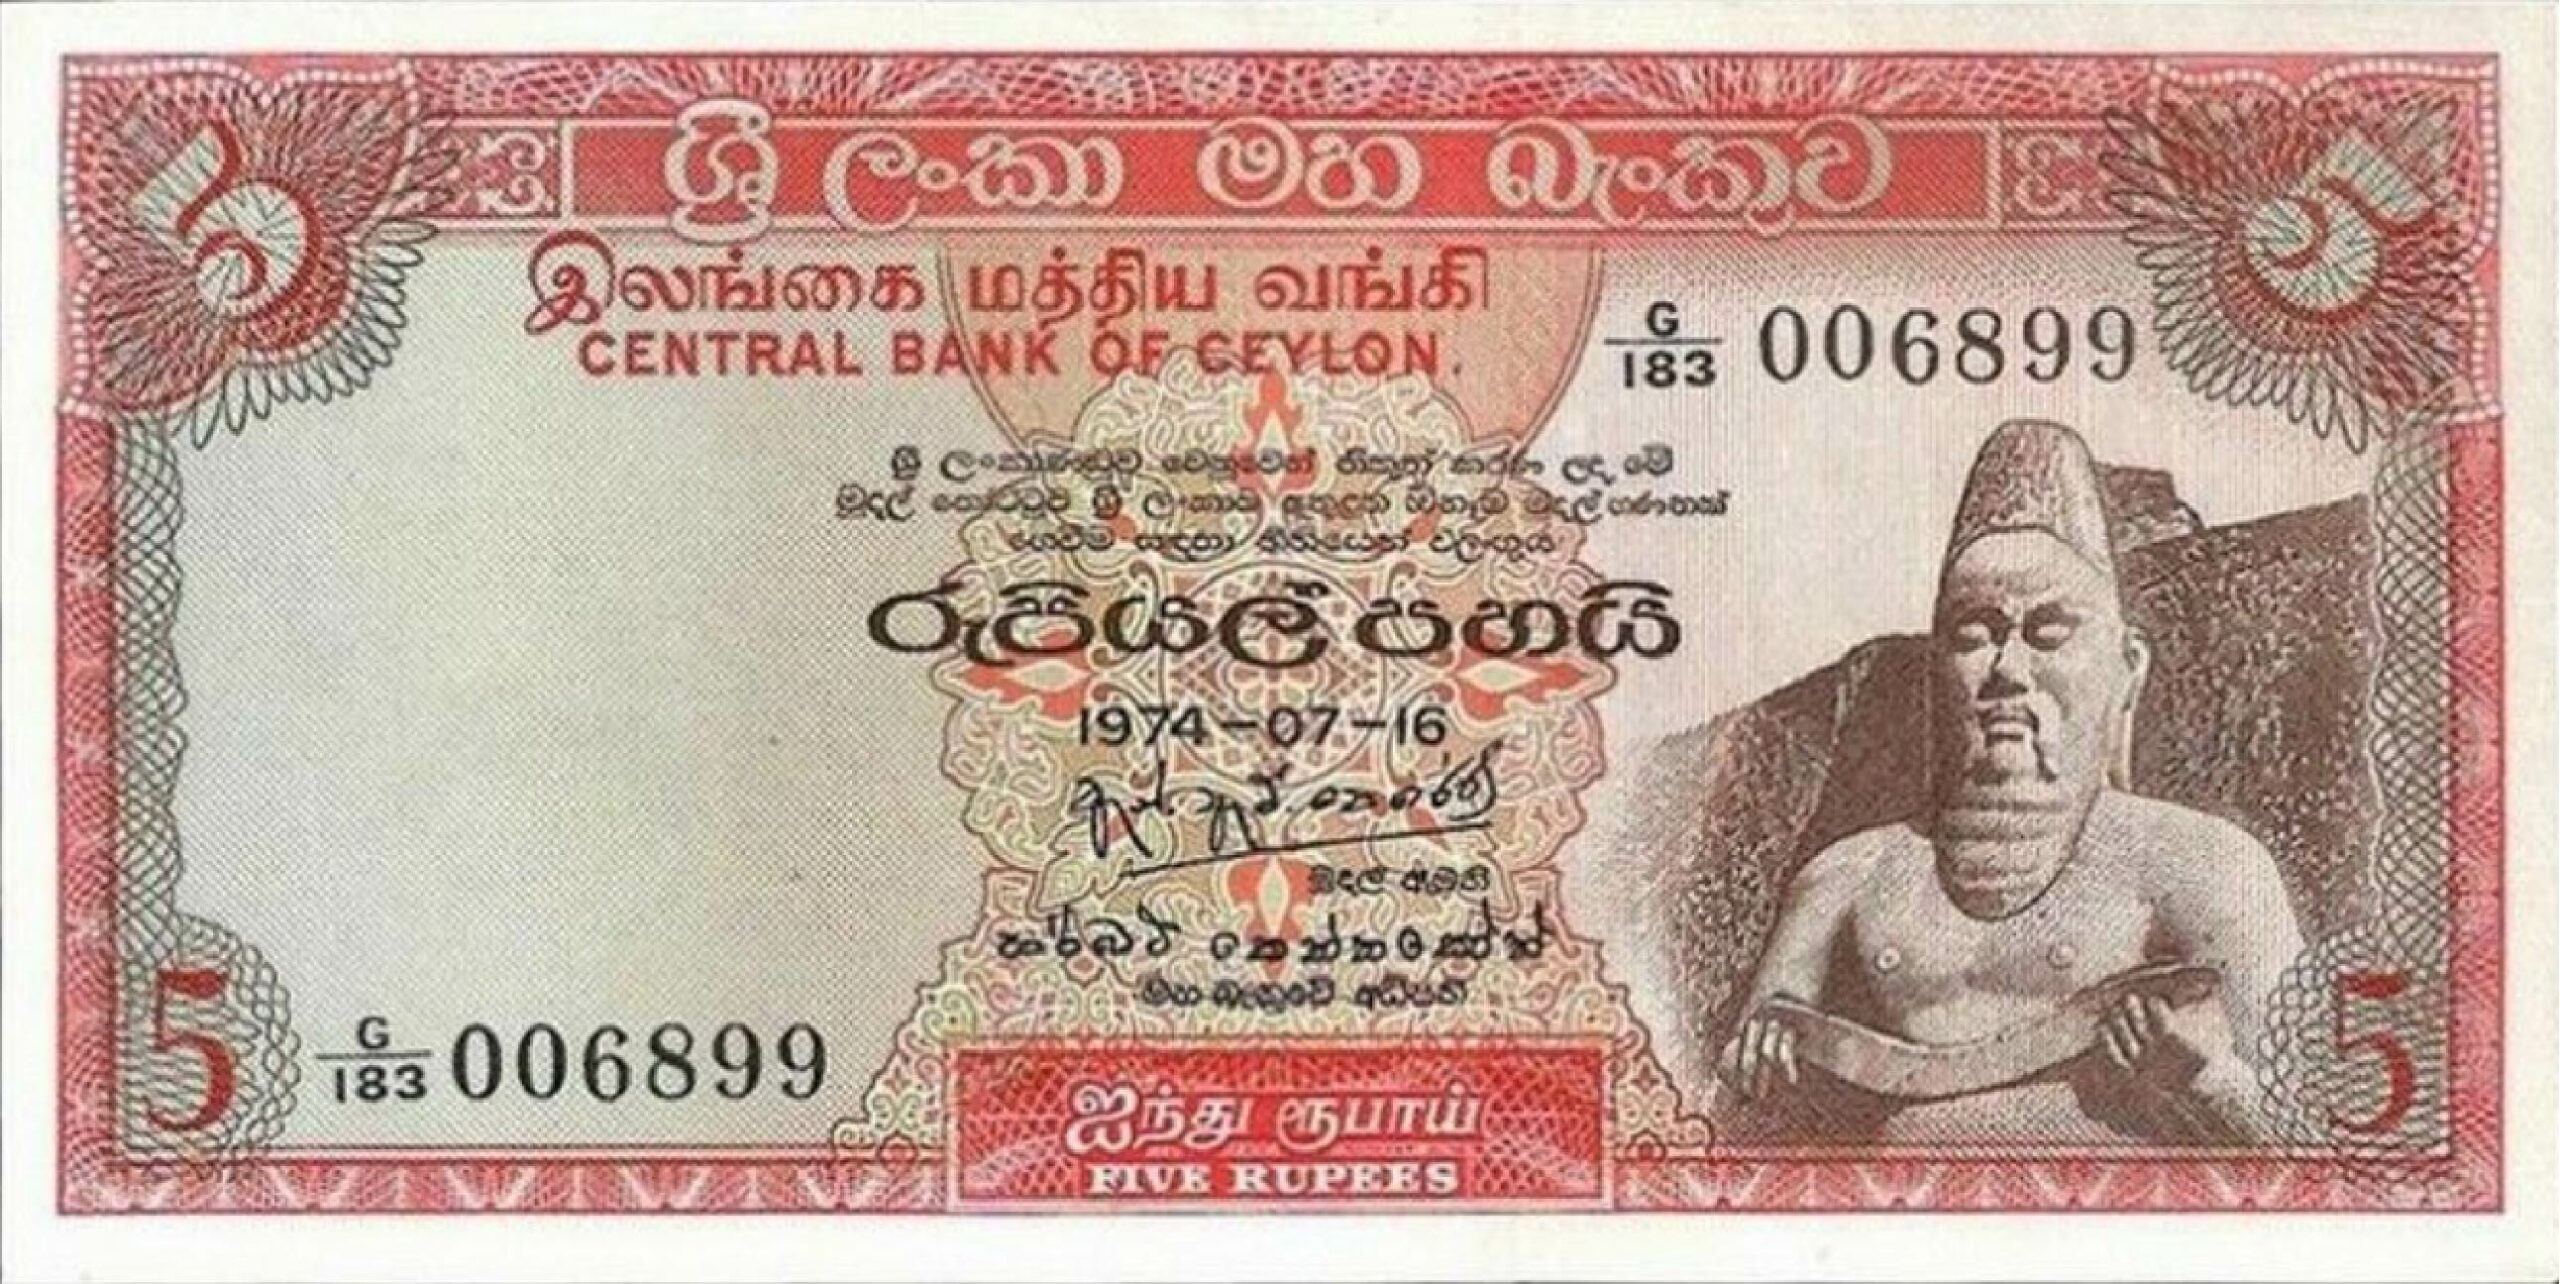 5 rupees Central Bank of Ceylon banknote (King Parakramabahu I statue)